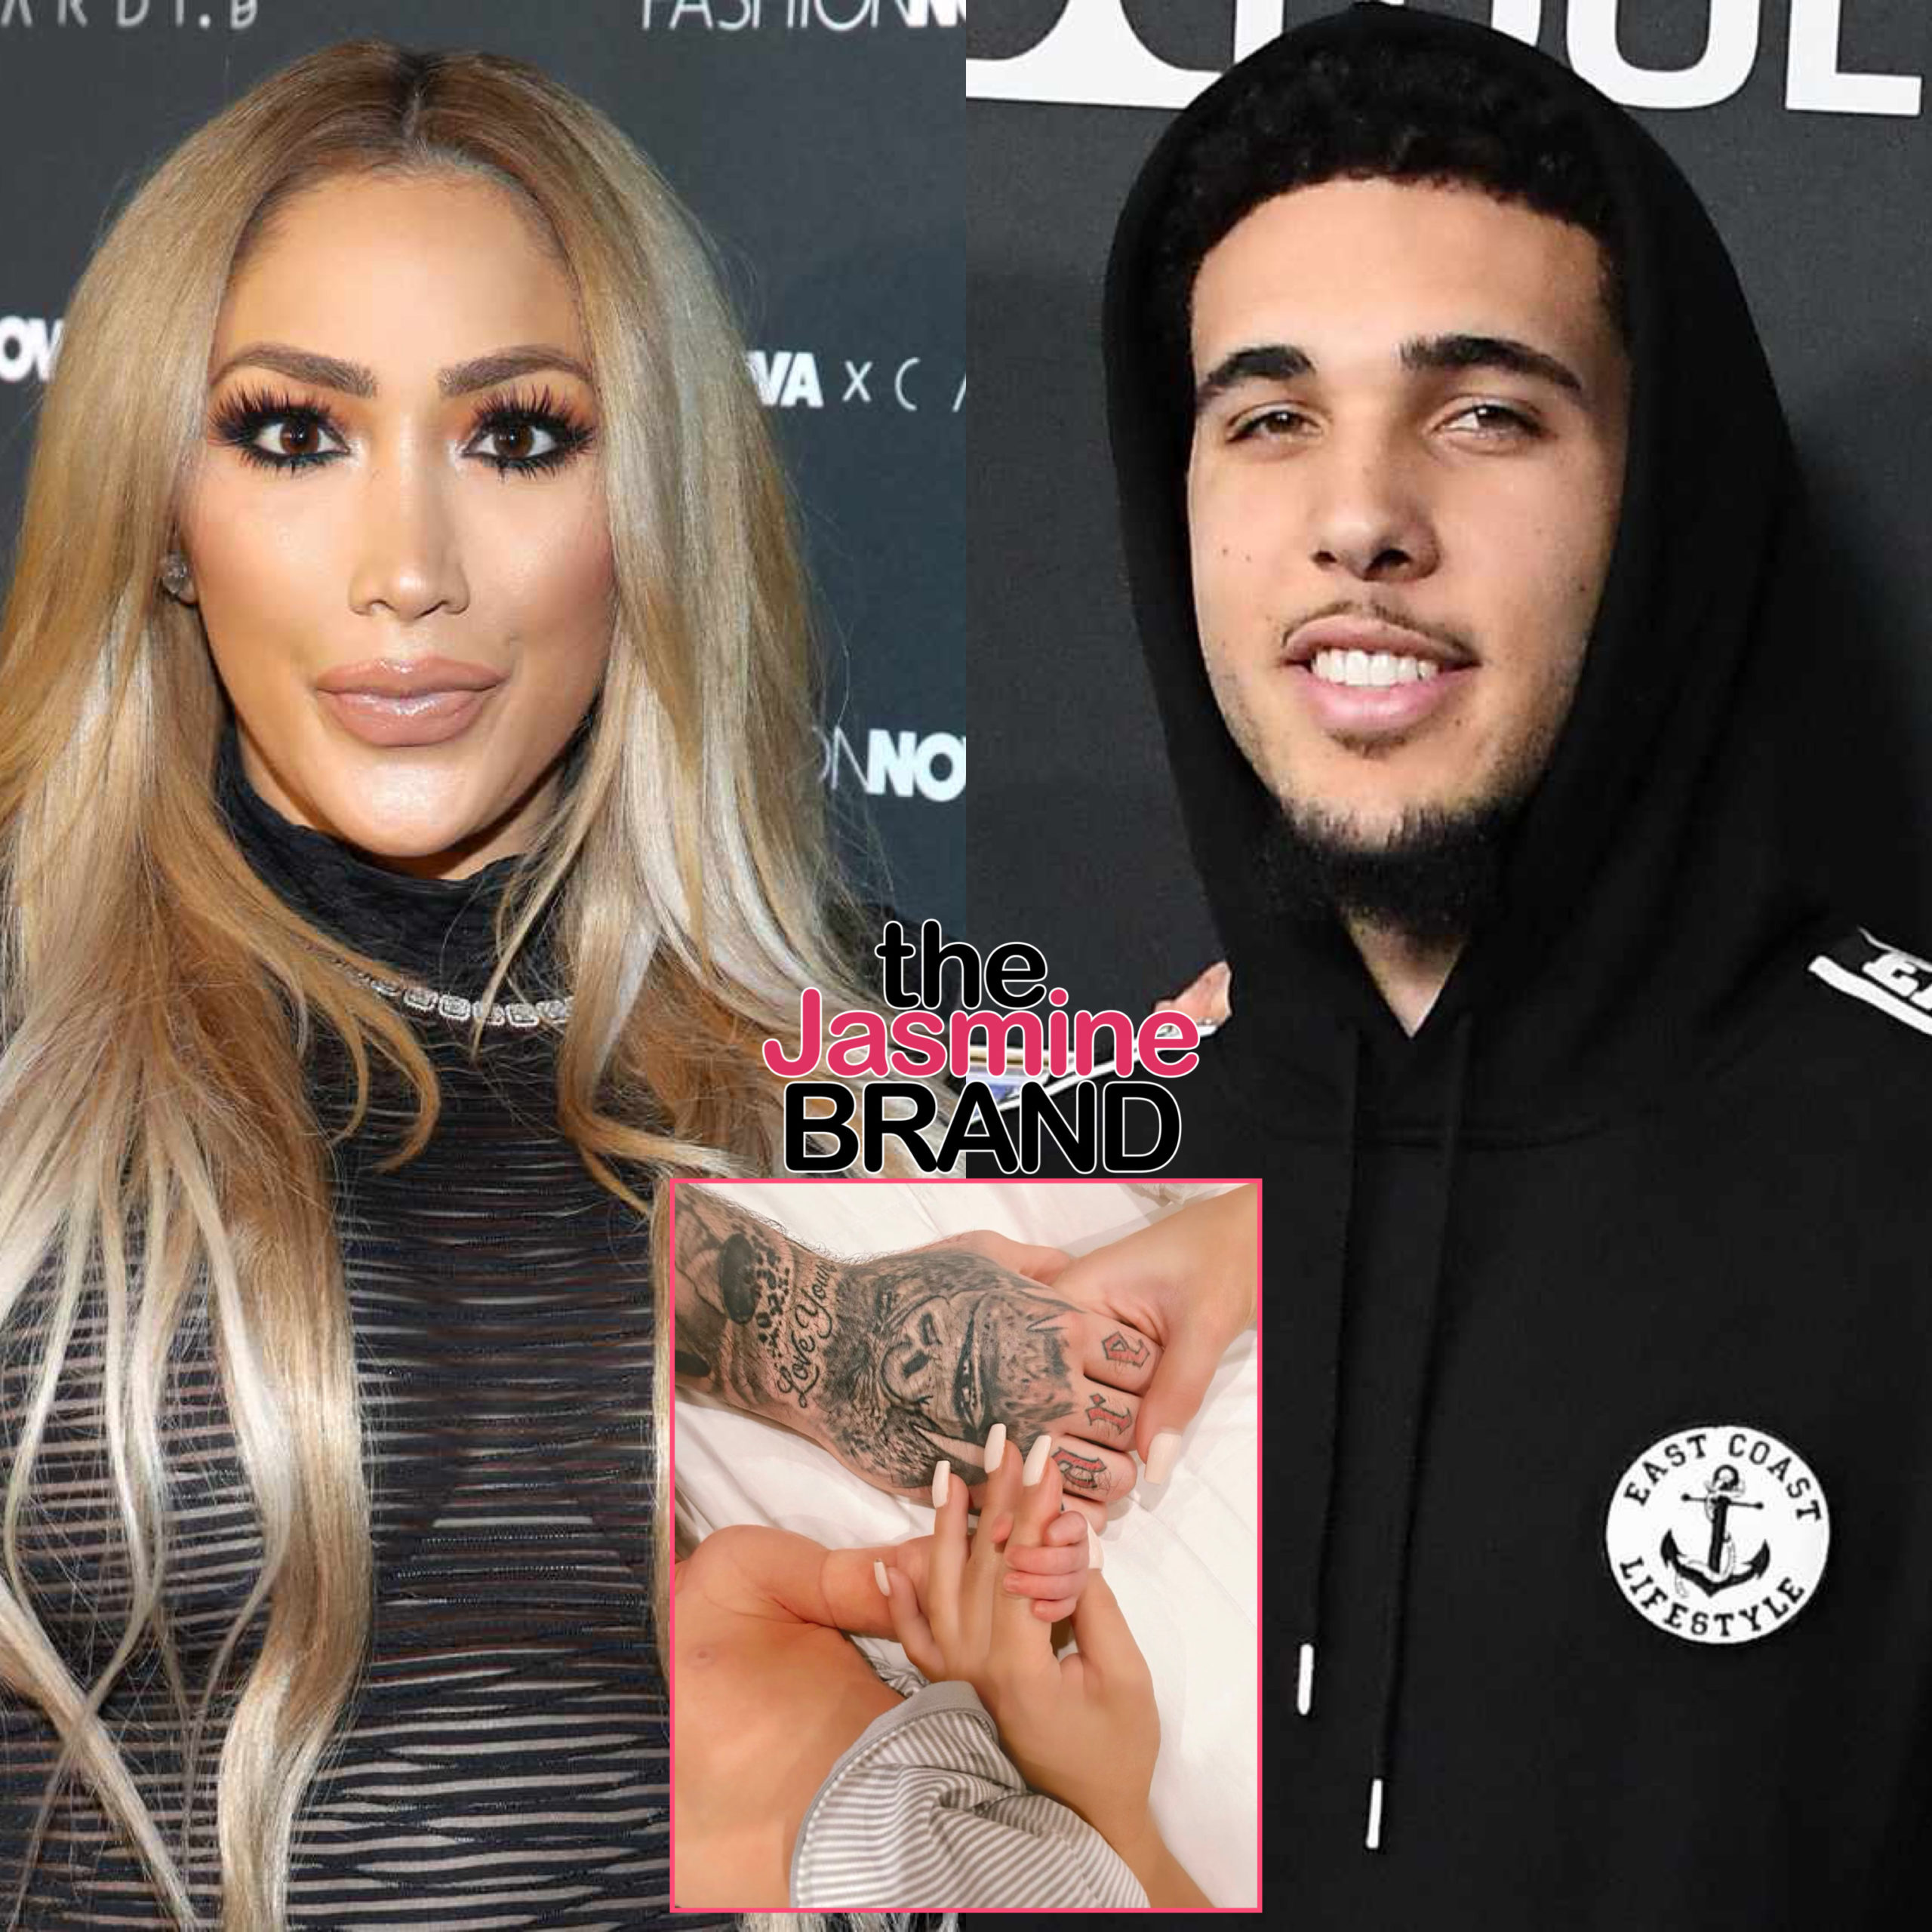 dawn ivory recommends Liangelo Ball Sex Tape